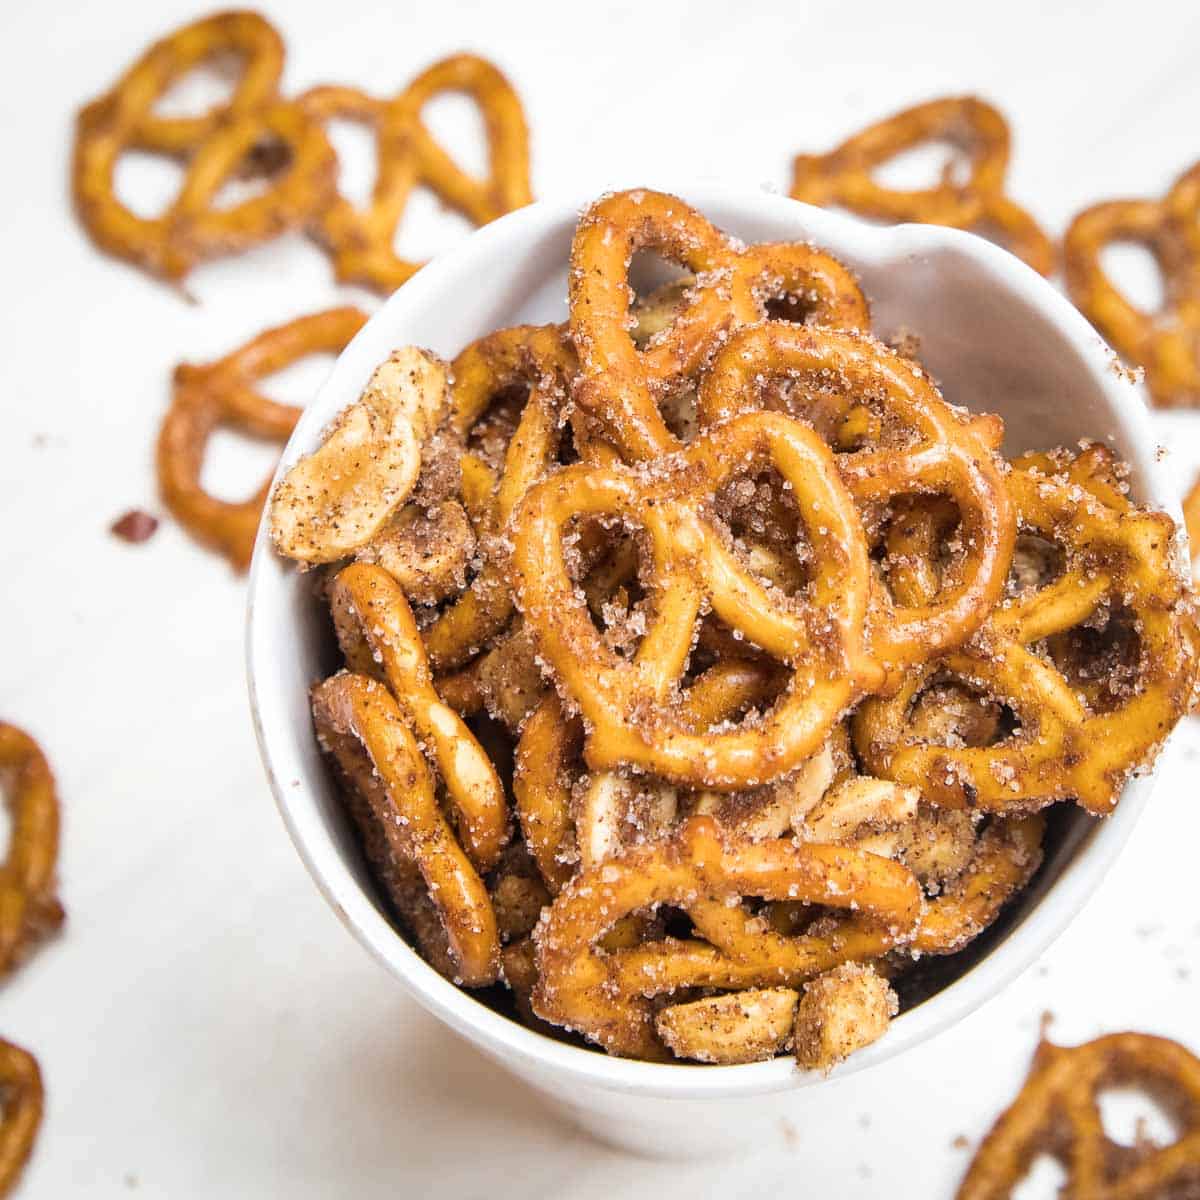 Overhead shot of cinnamon pretzels in a white cup with more scattered on a white surface in the background.